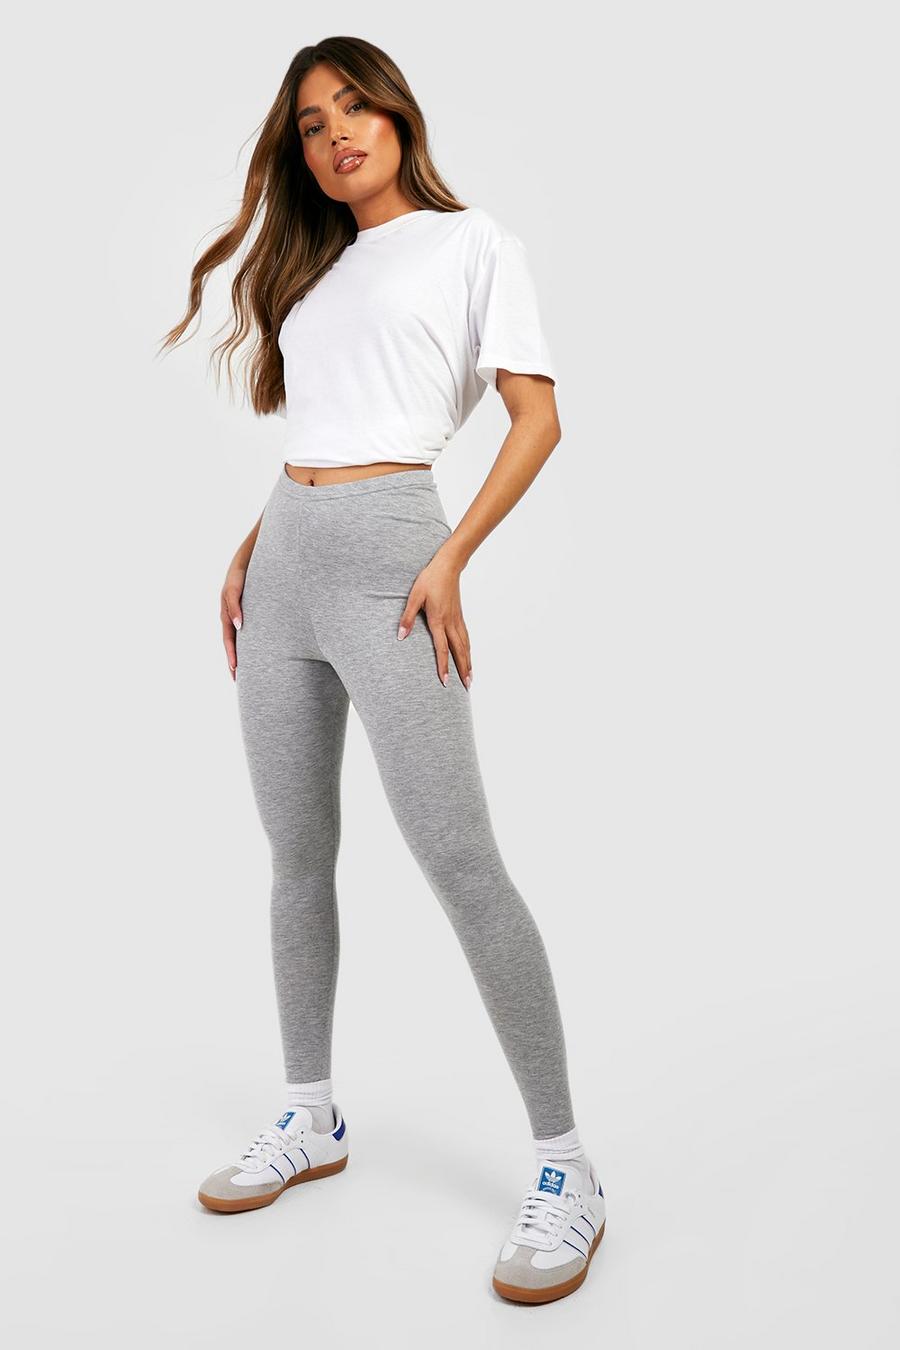 Ruched Bum Booty Boosting Jersey Knit Leggings